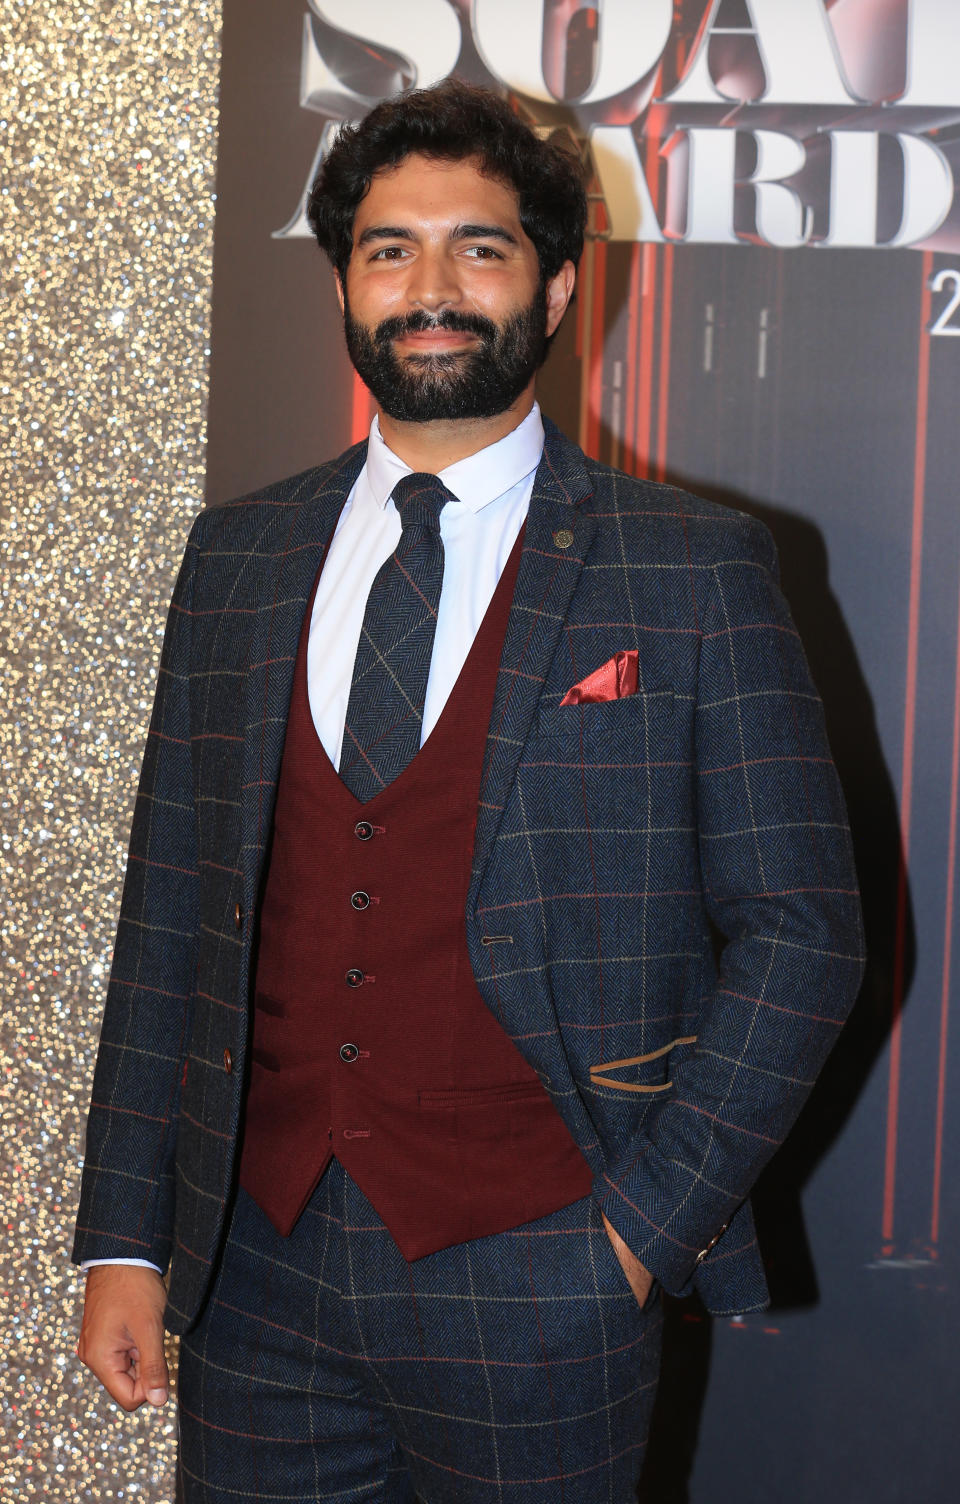 Charlie de Melo who plays Imran Habeeb in Coronation Street attending the British Soap Awards 2019 held at the Lyric Theatre at The Lowry in Manchester.